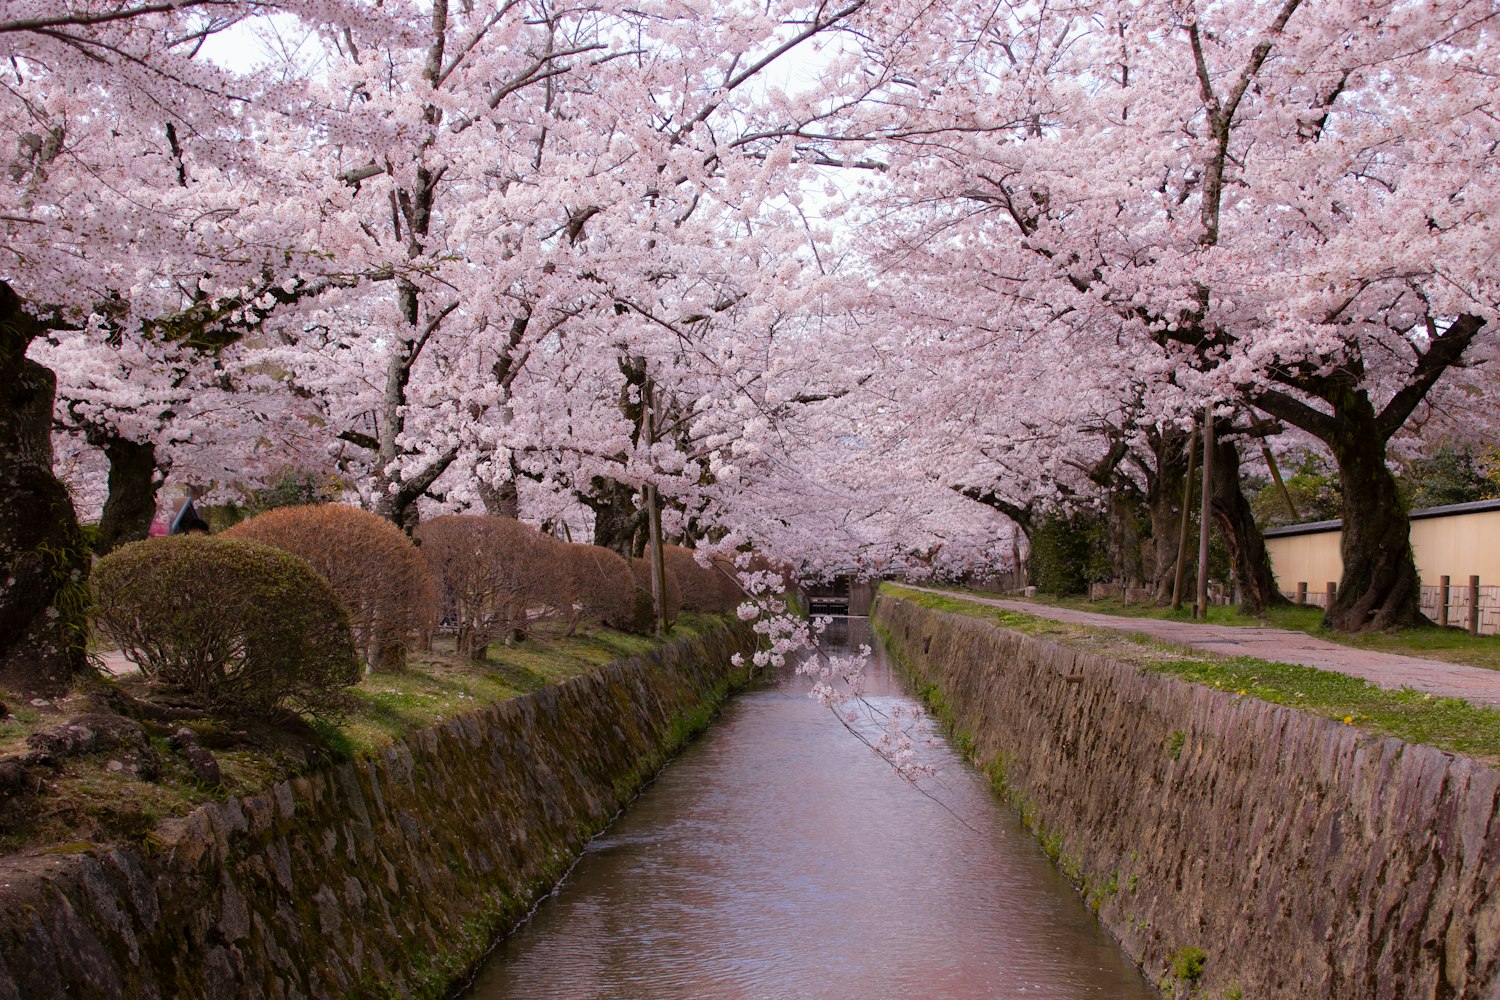 Cherry blossom at Philosopher's Path in Kyoto